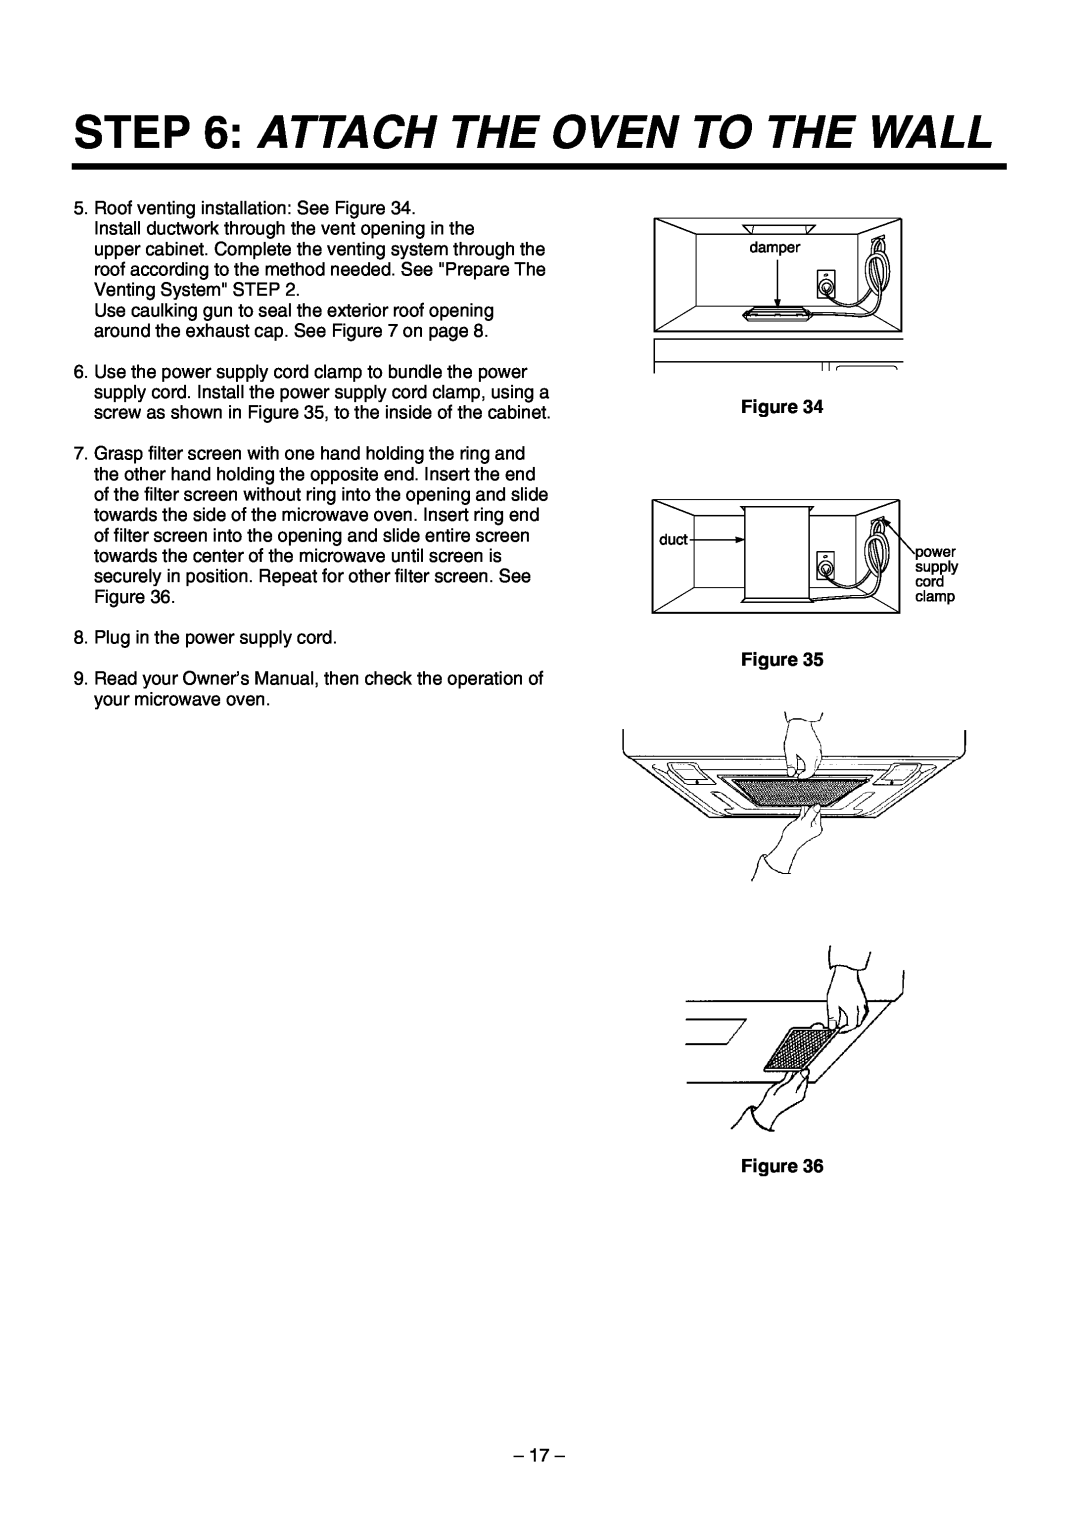 LG Electronics 3828W5U0492 installation instructions Attach The Oven To The Wall, Roof venting installation See Figure 